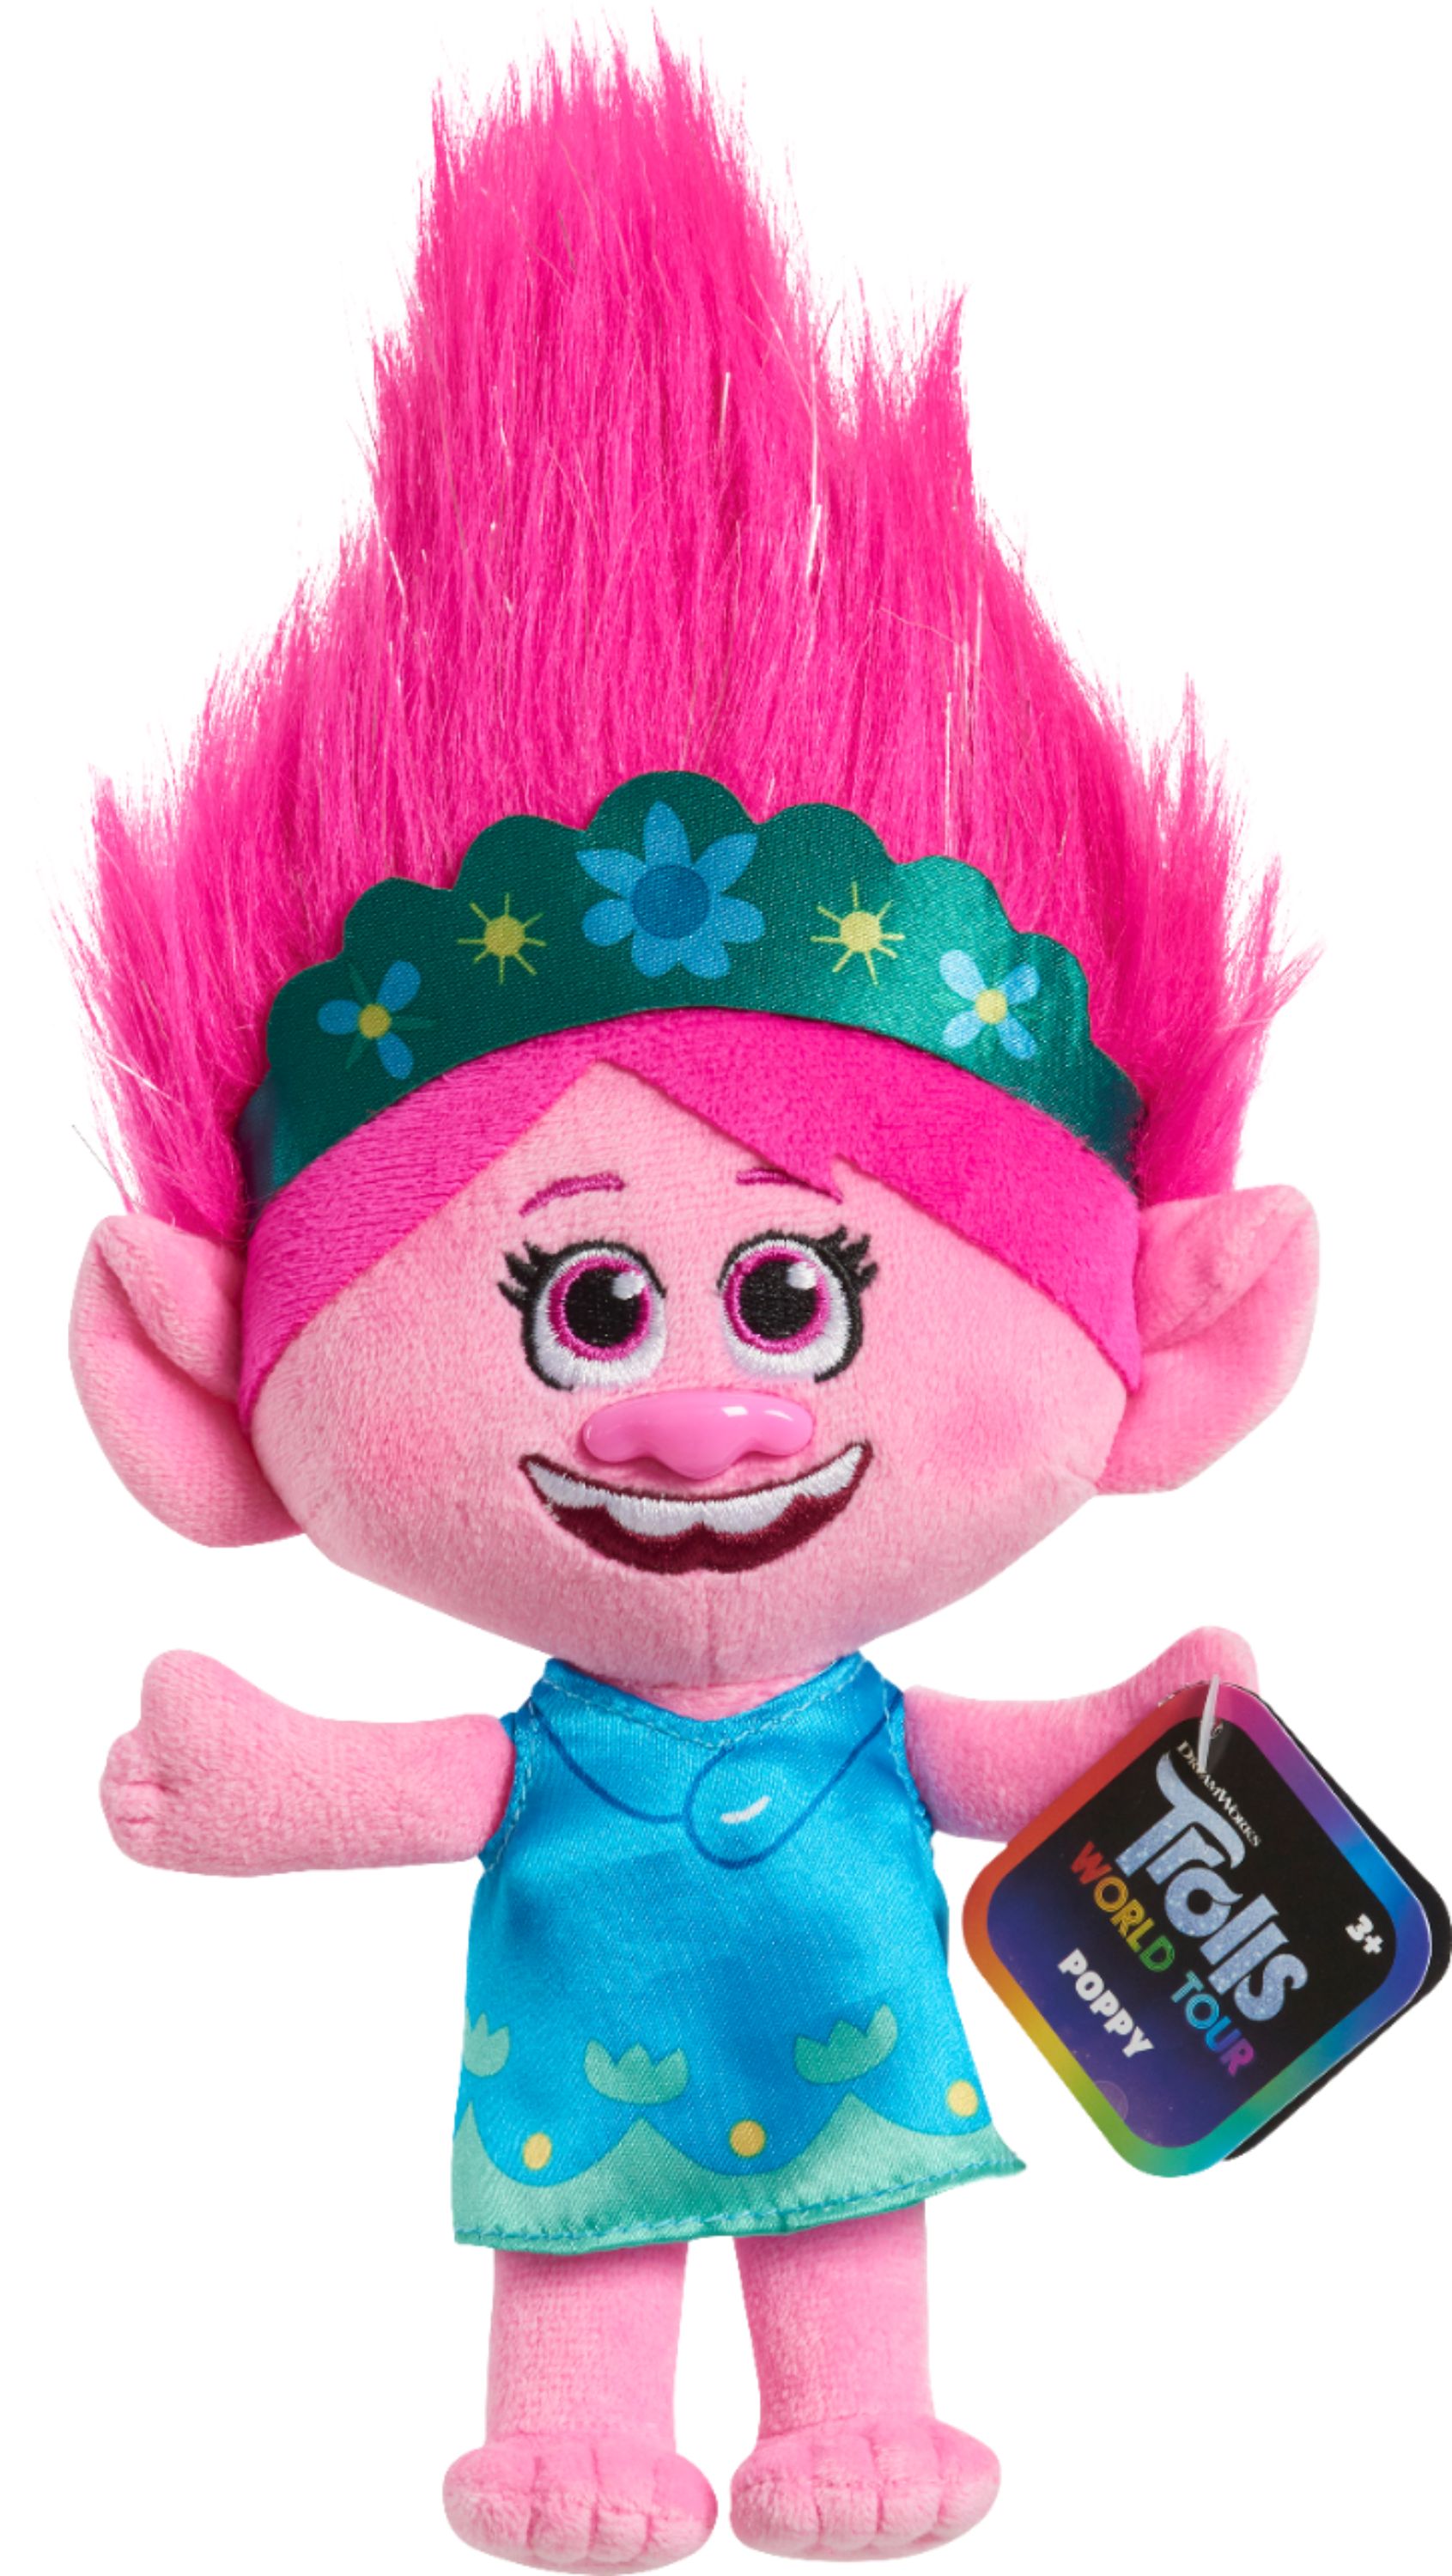 Just Play - Trolls World Tour Small Plush - Styles May Vary